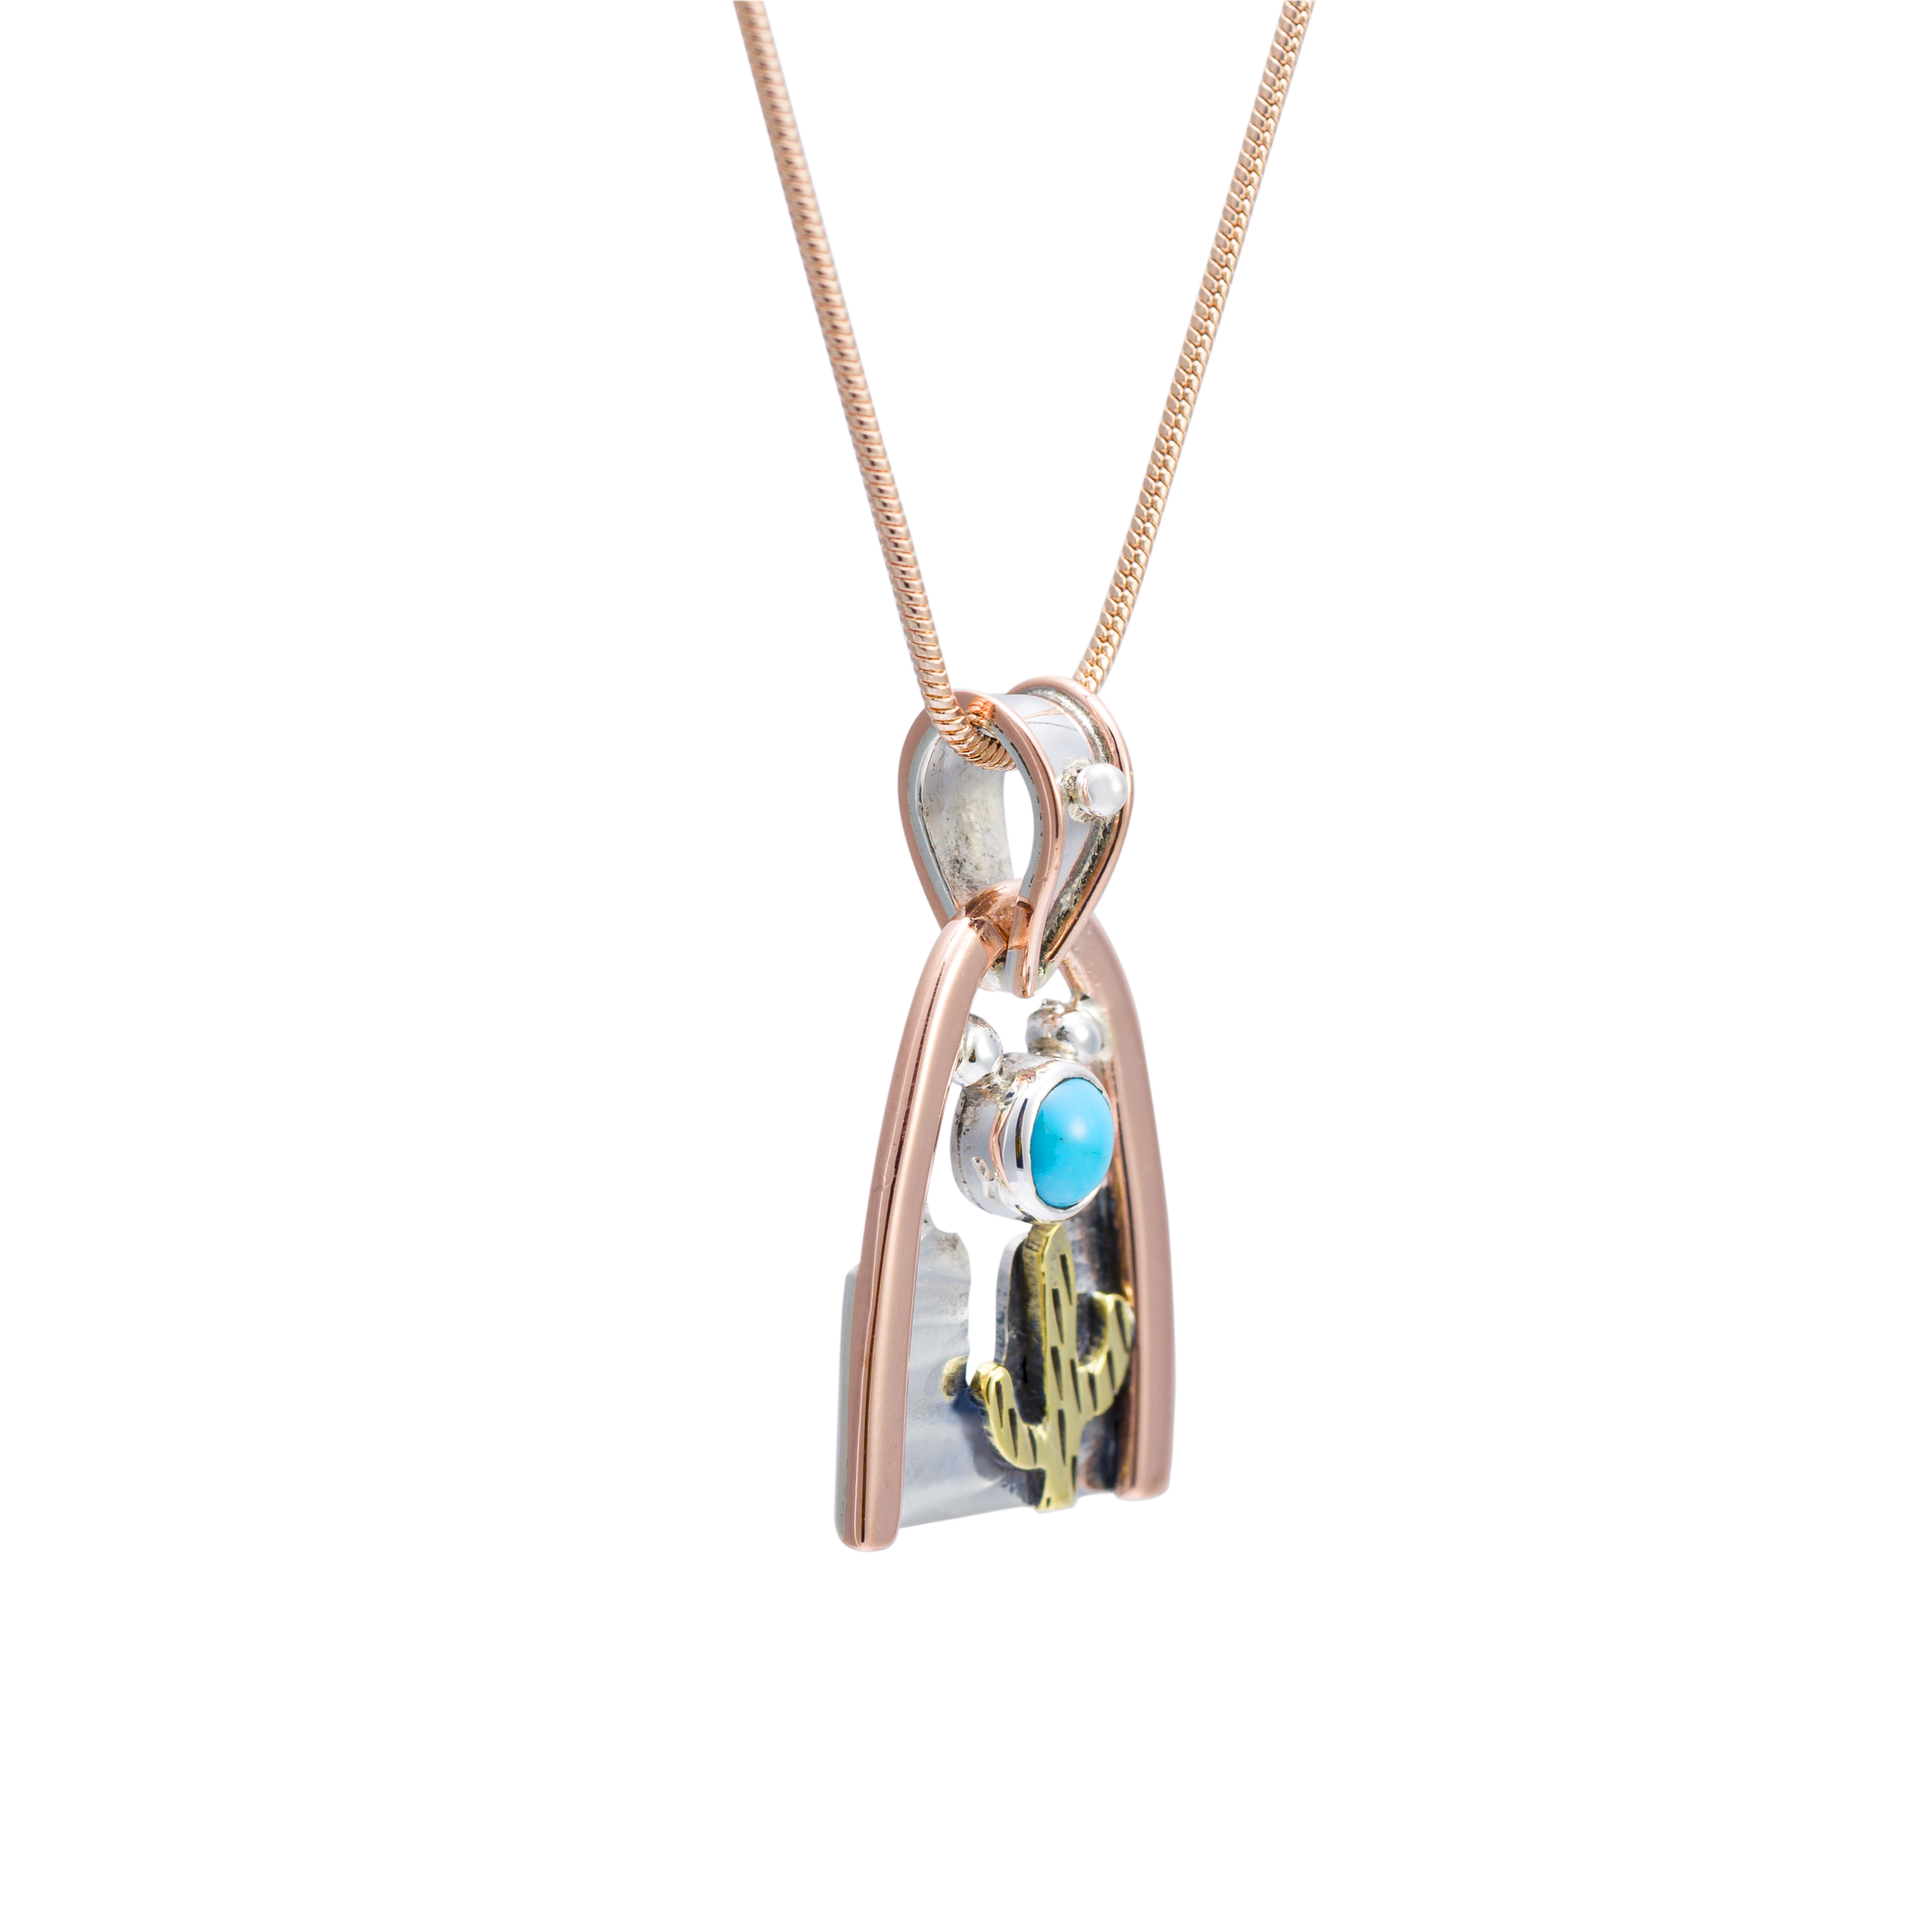 PN.ANG.2160 - Saguaro Mountain Pendant, Sterling Silver and Copper  with Sleeping Beauty Turquoise - PN.ANG.2160